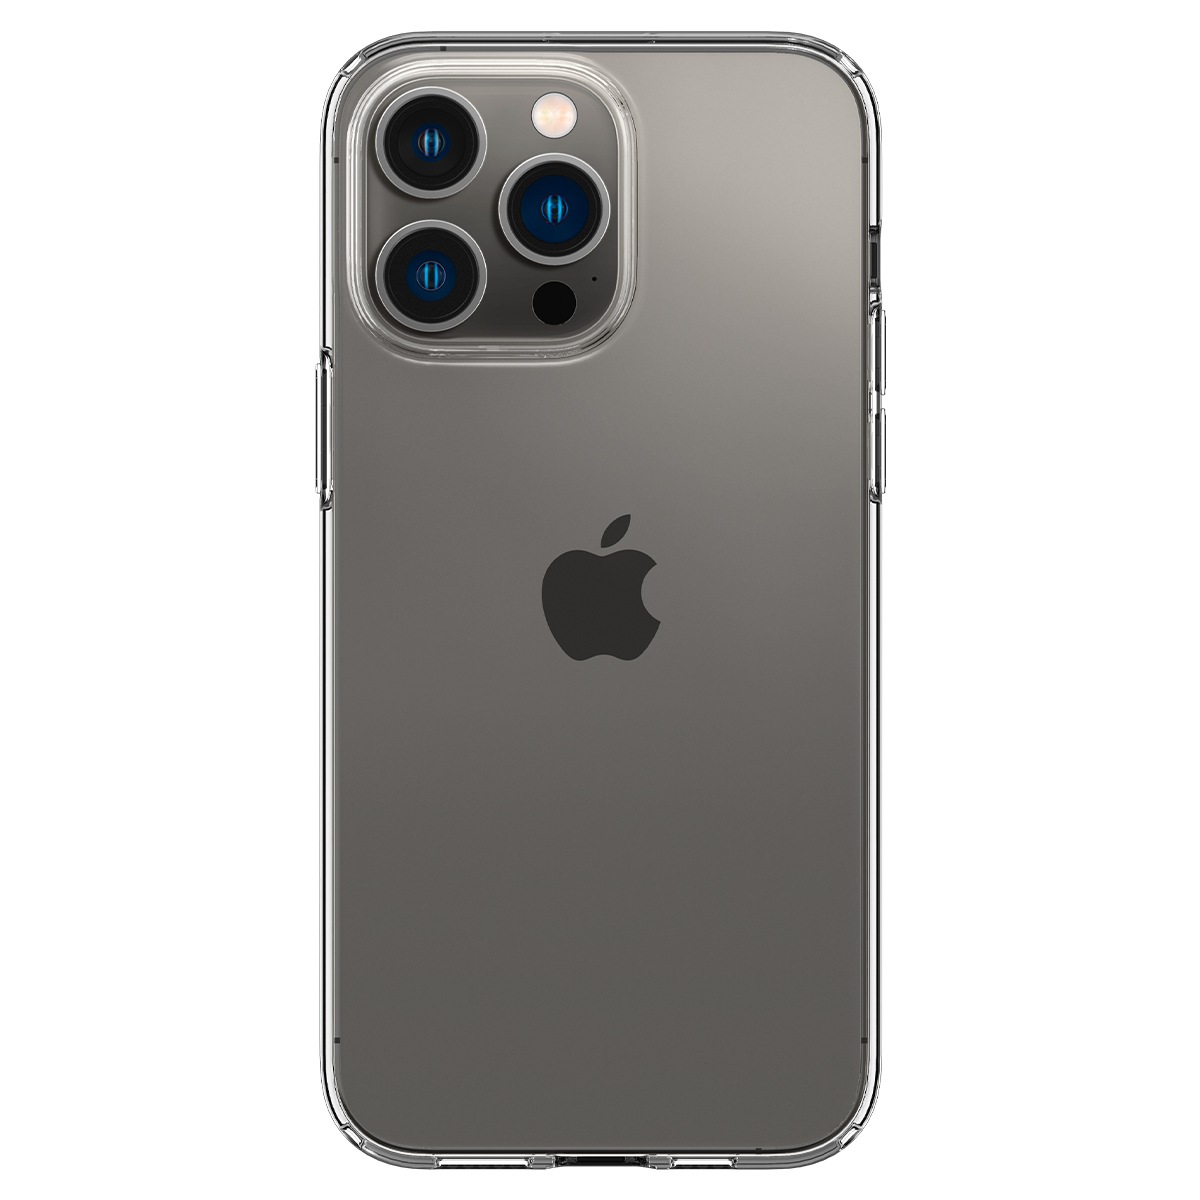 Backcover »Spigen Thin Fit for iPhone 14 Pro Max gun metal«, iPhone 14 Pro Max